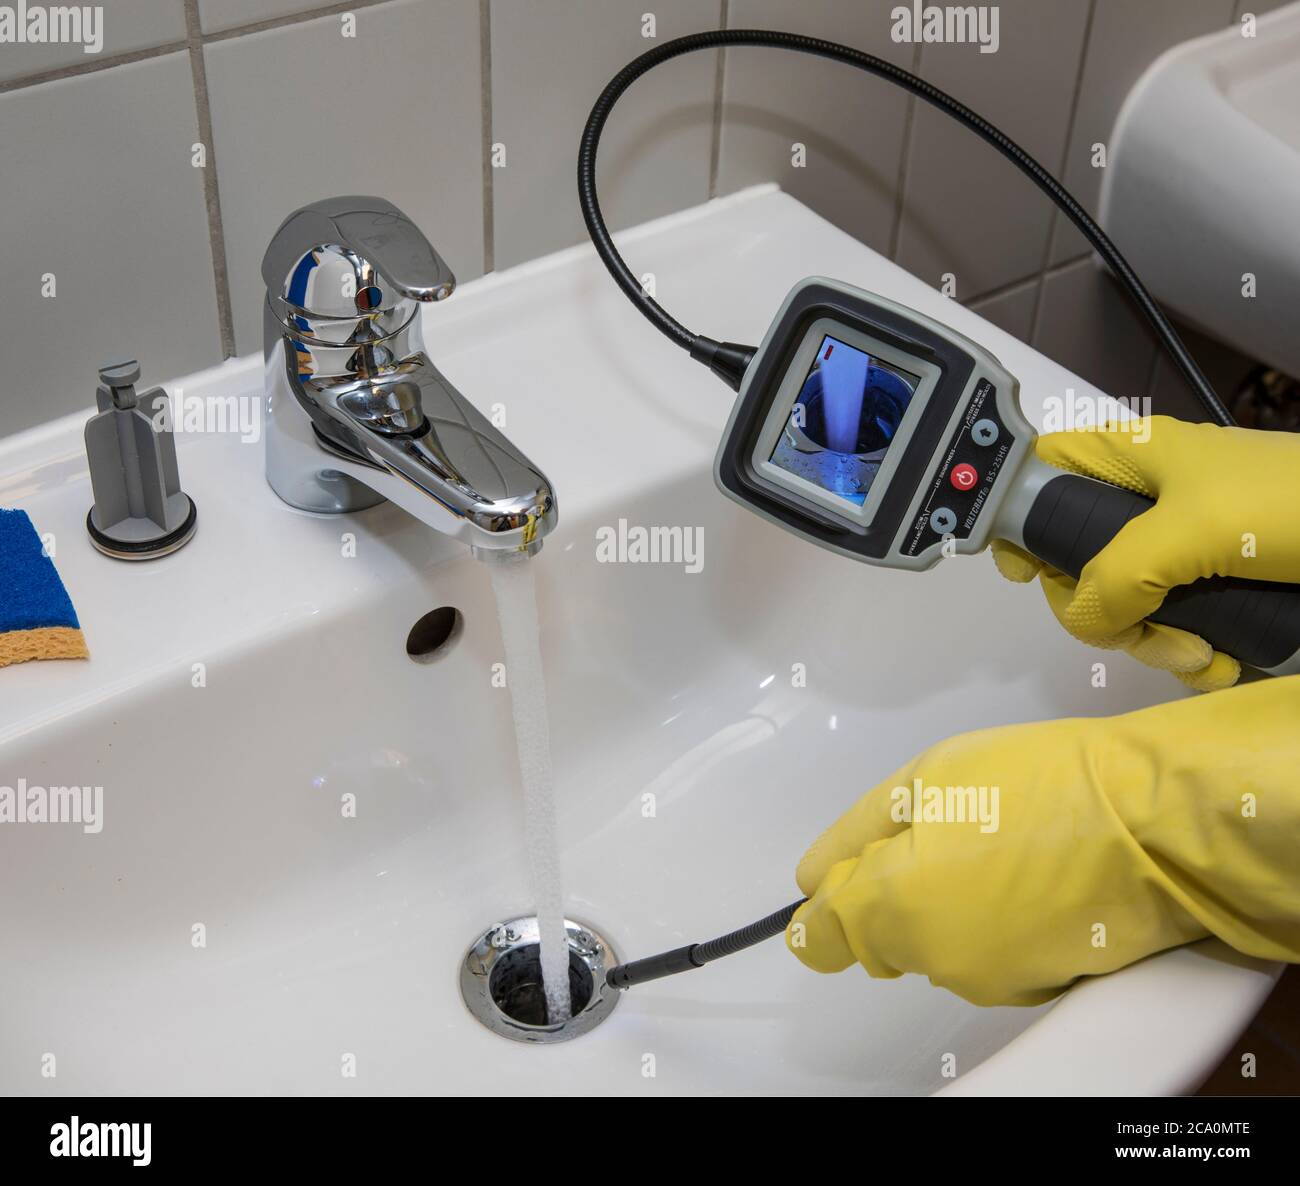 Controlling water drain with endoscope in home Stock Photo